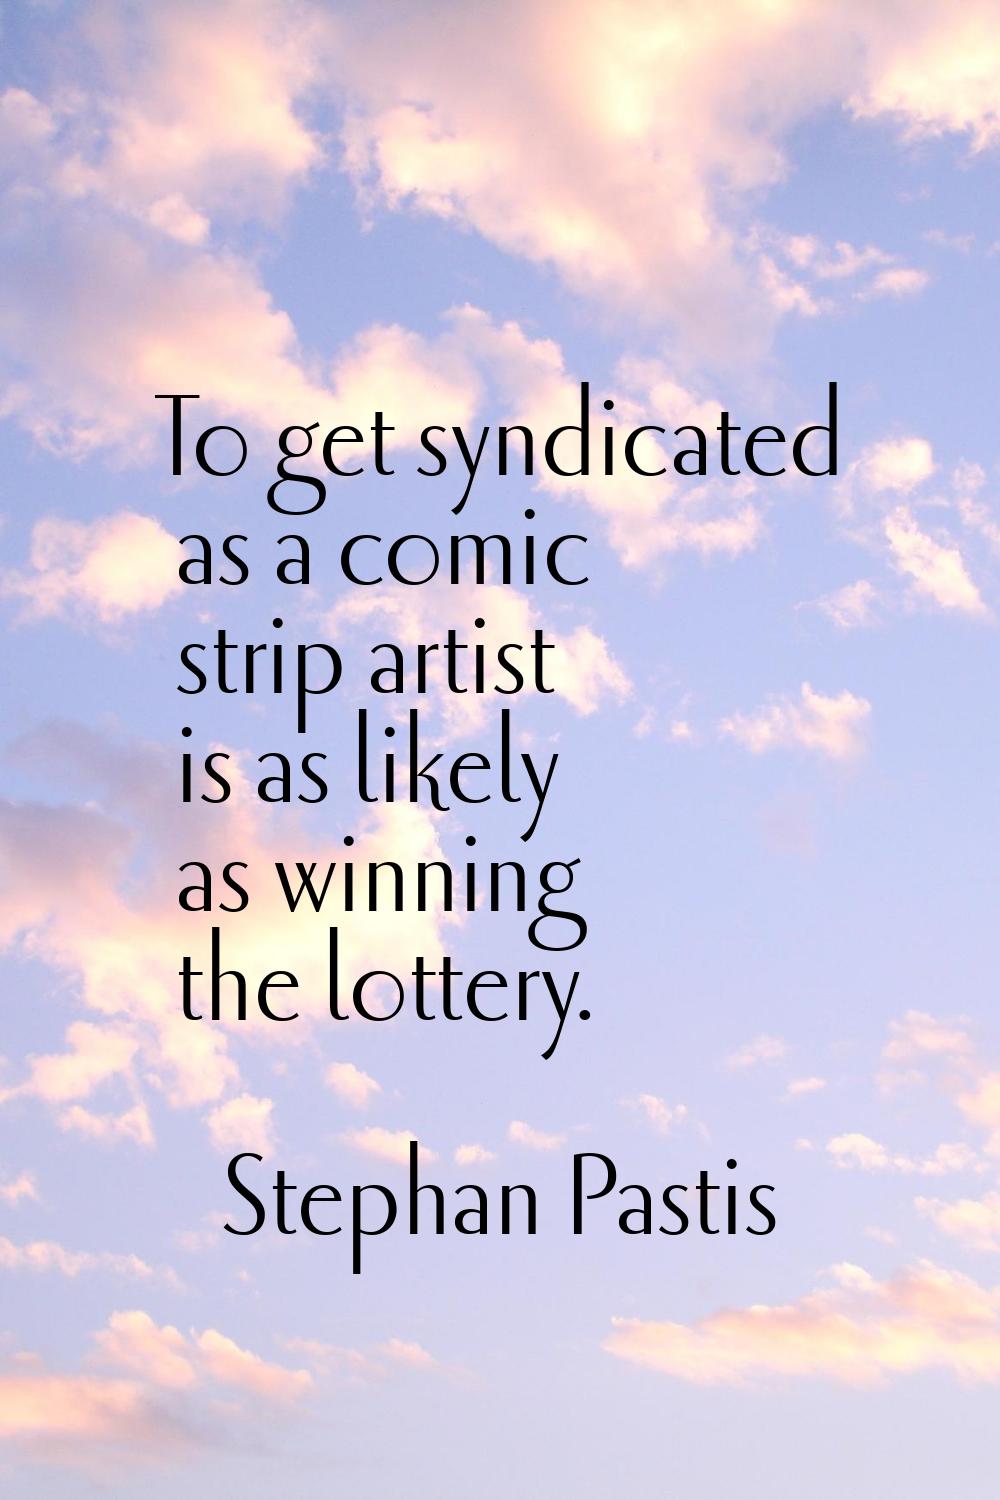 To get syndicated as a comic strip artist is as likely as winning the lottery.